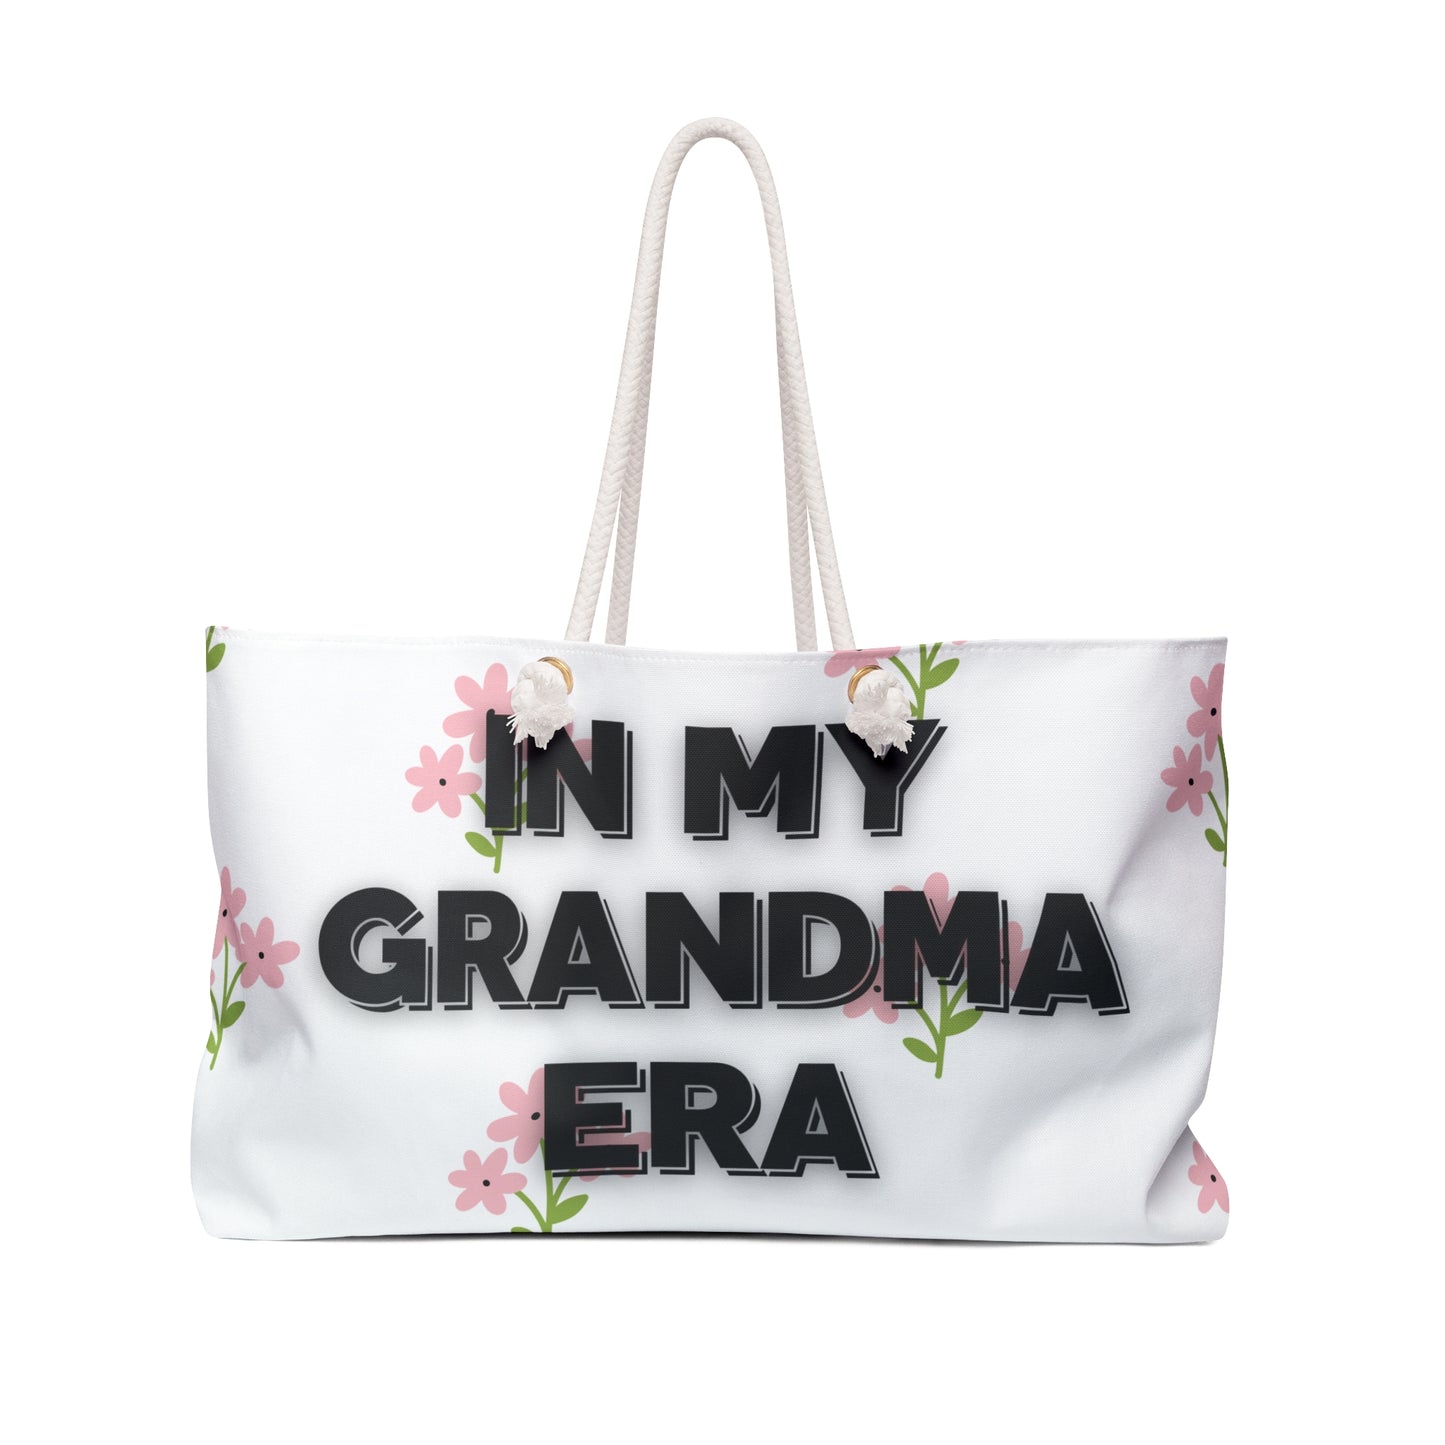 Personalized spacious Weekender Bag, Mother's Day, flower designs, Gifts for mom's day, custom mama bag (in my grandma era)